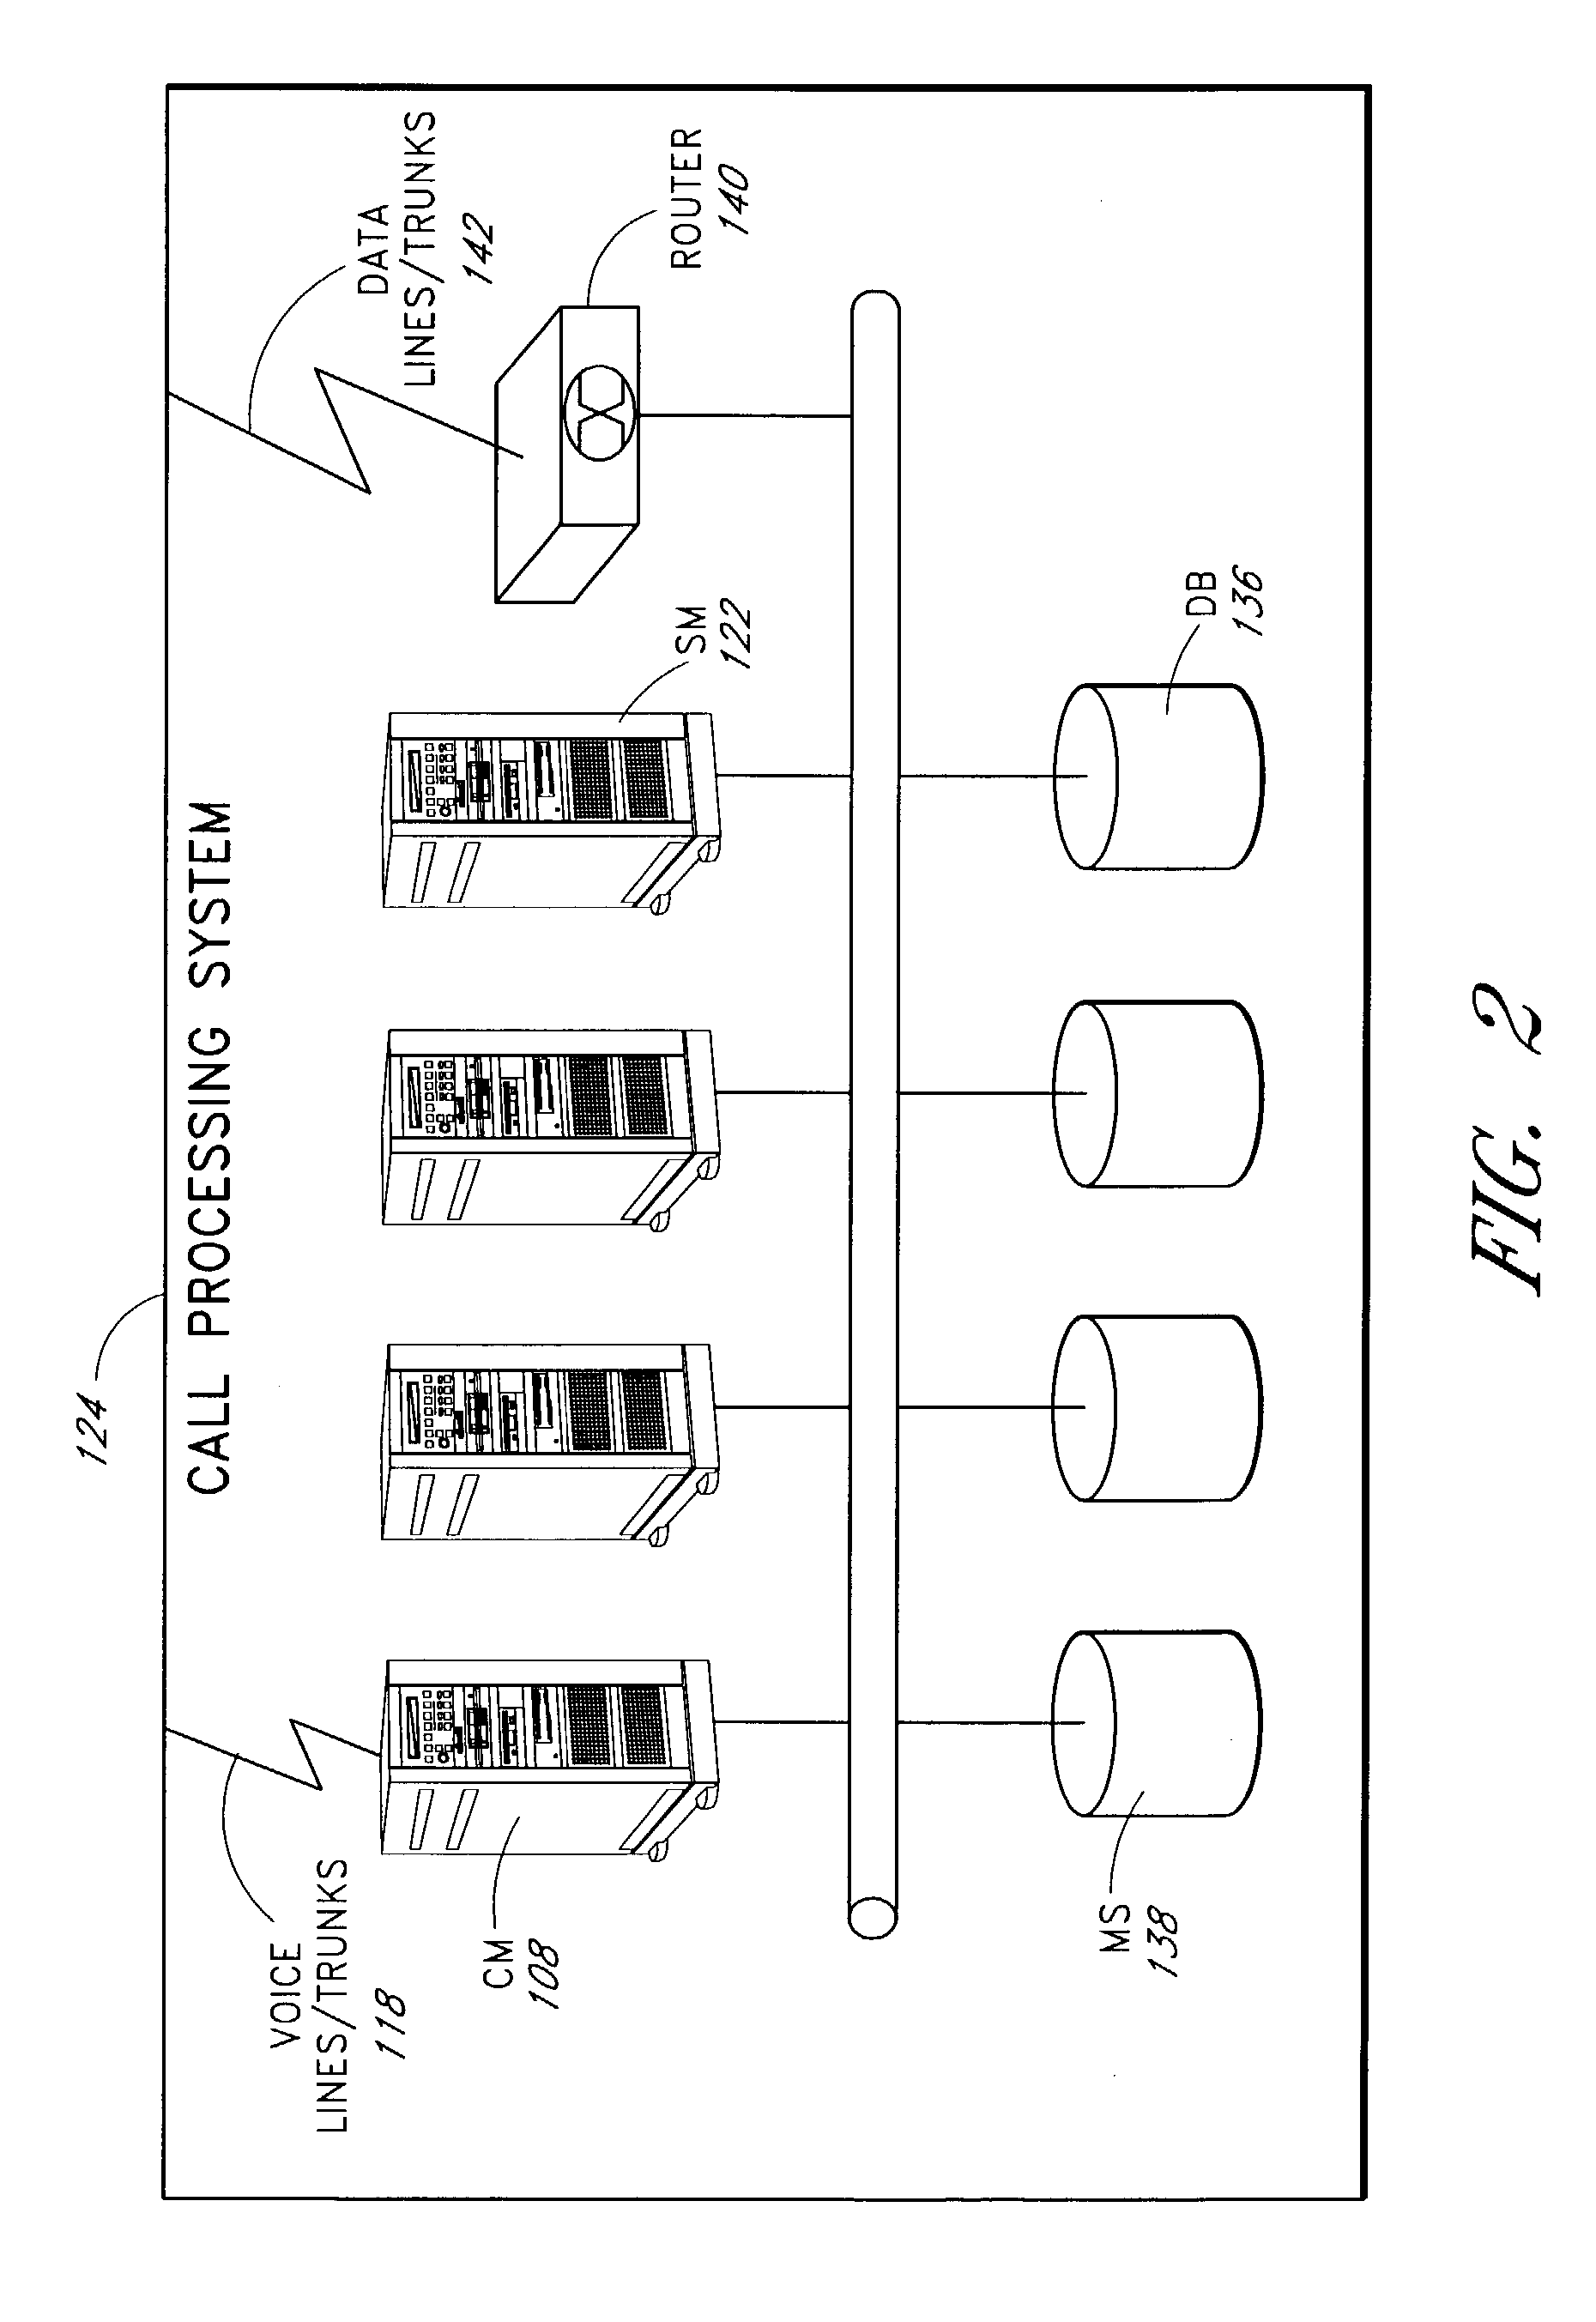 Apparatus and methods for telecommunication authentication